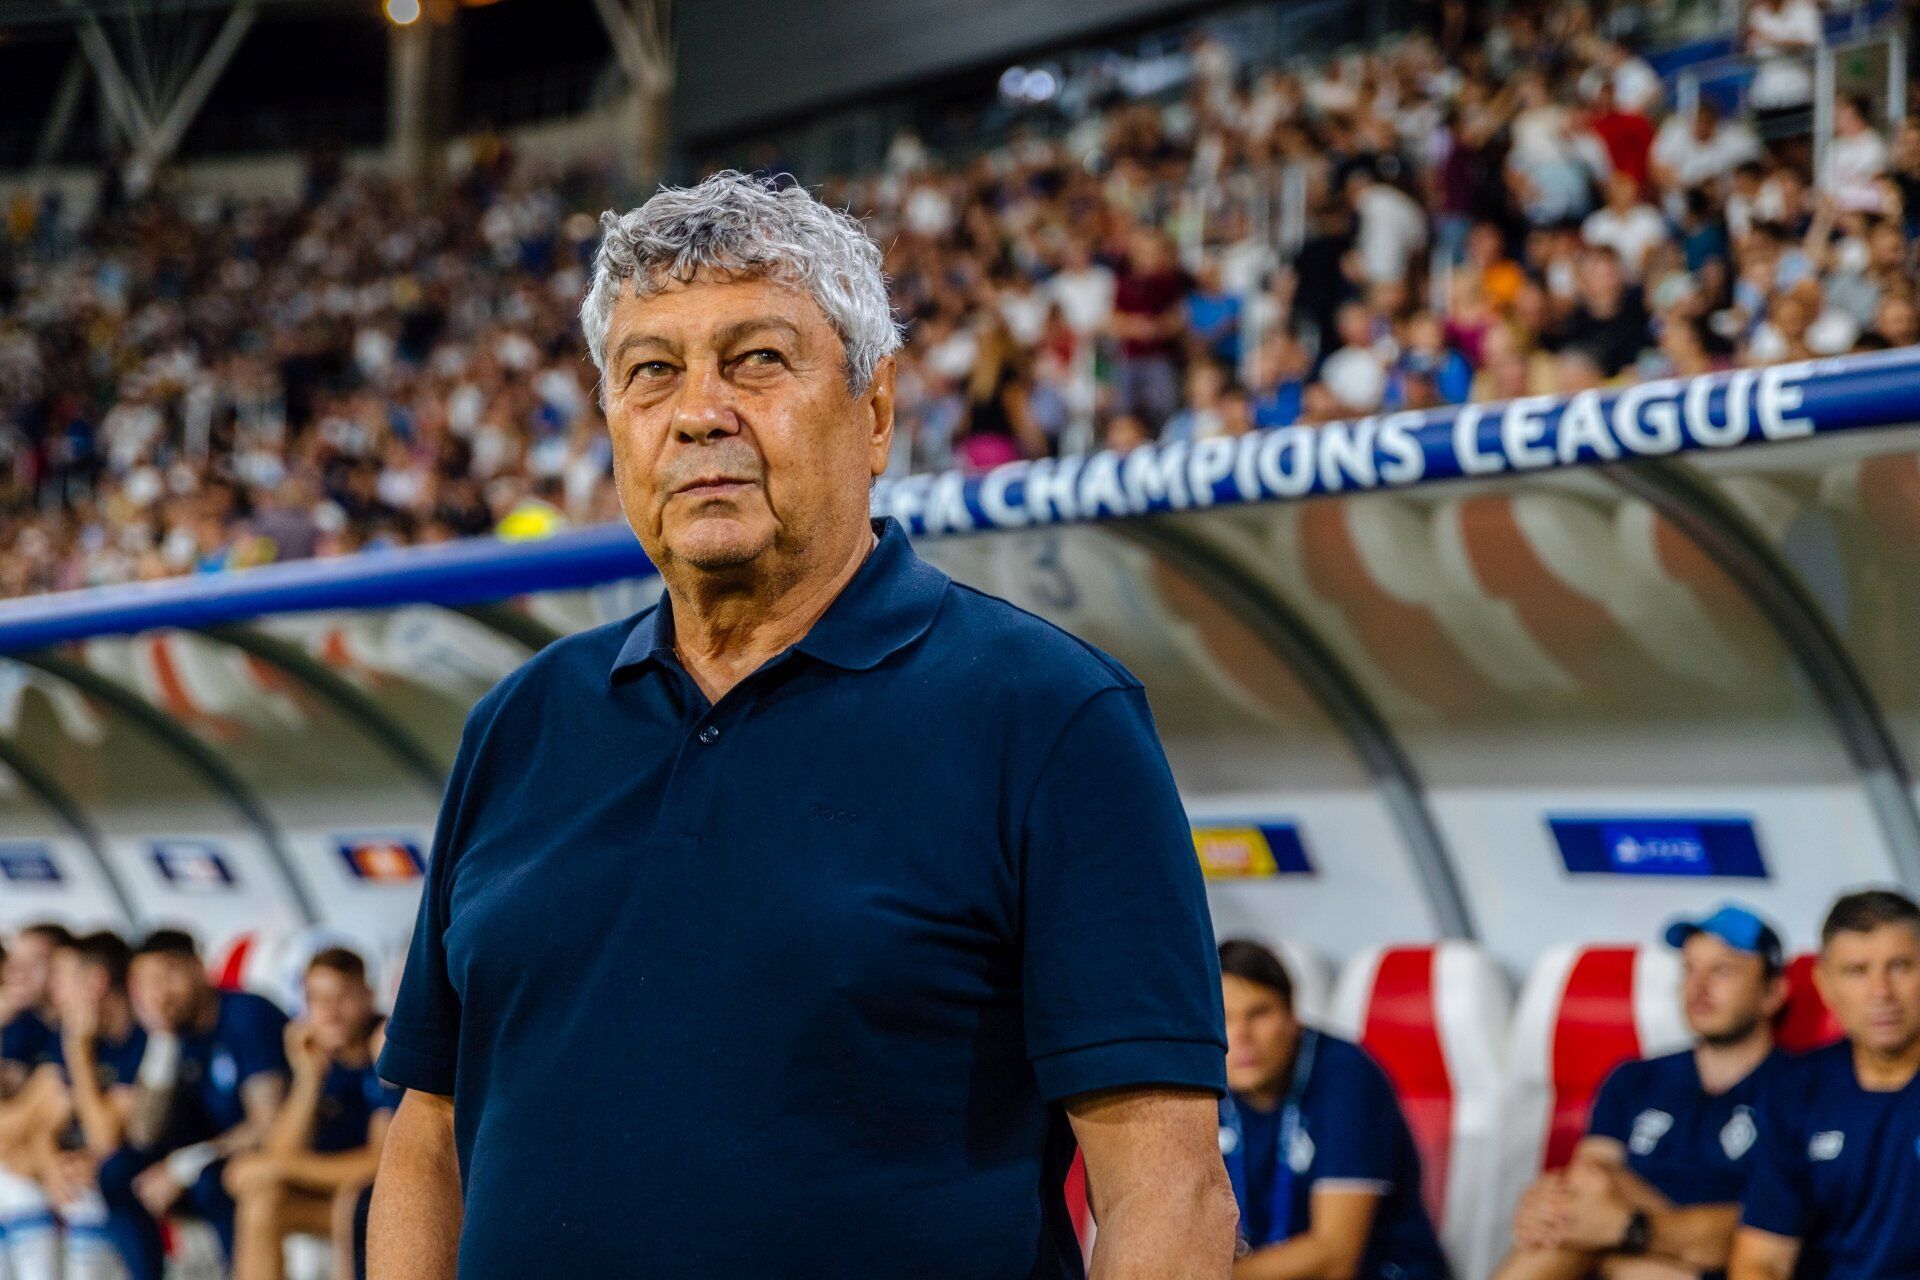 ''It's going to happen anyway'': Lucescu called for friendly matches between Ukraine and Russia